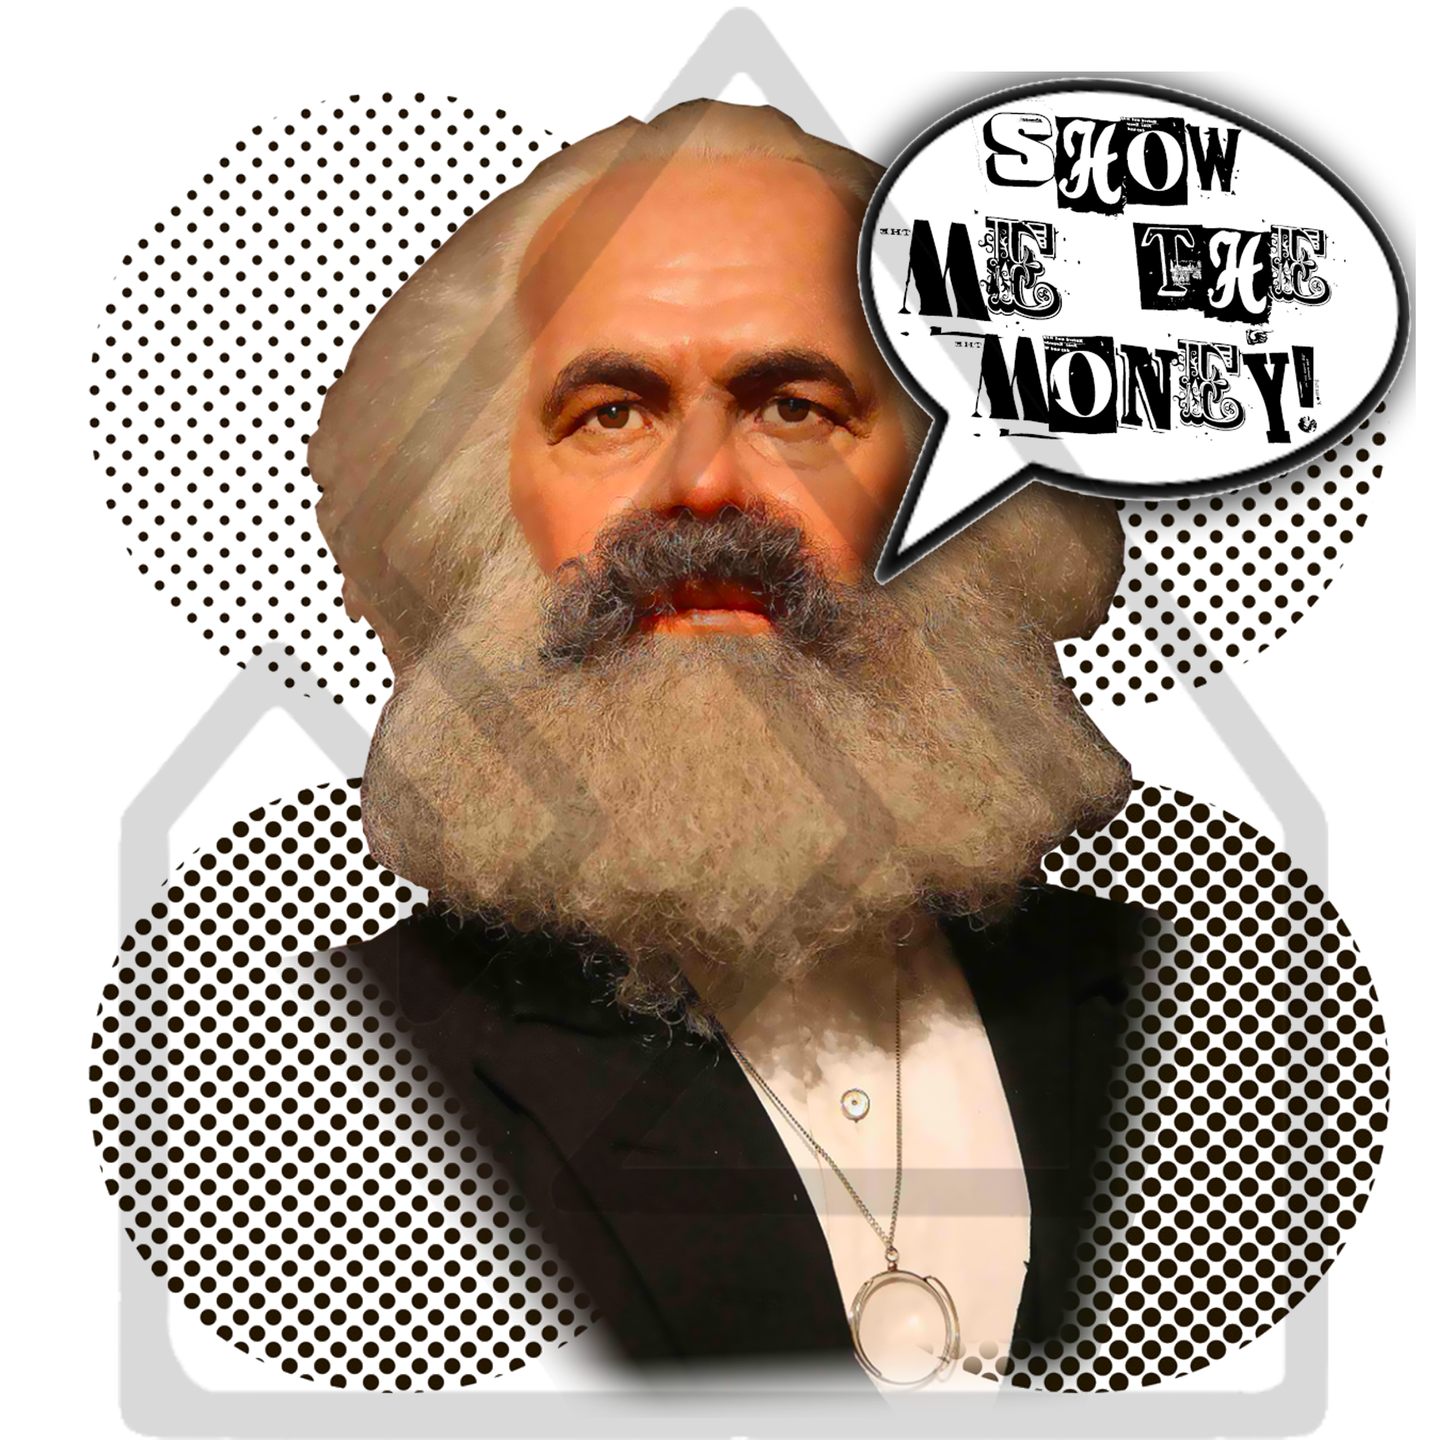 Windows Booksellers – Marx, Show Me the Money t-shirt